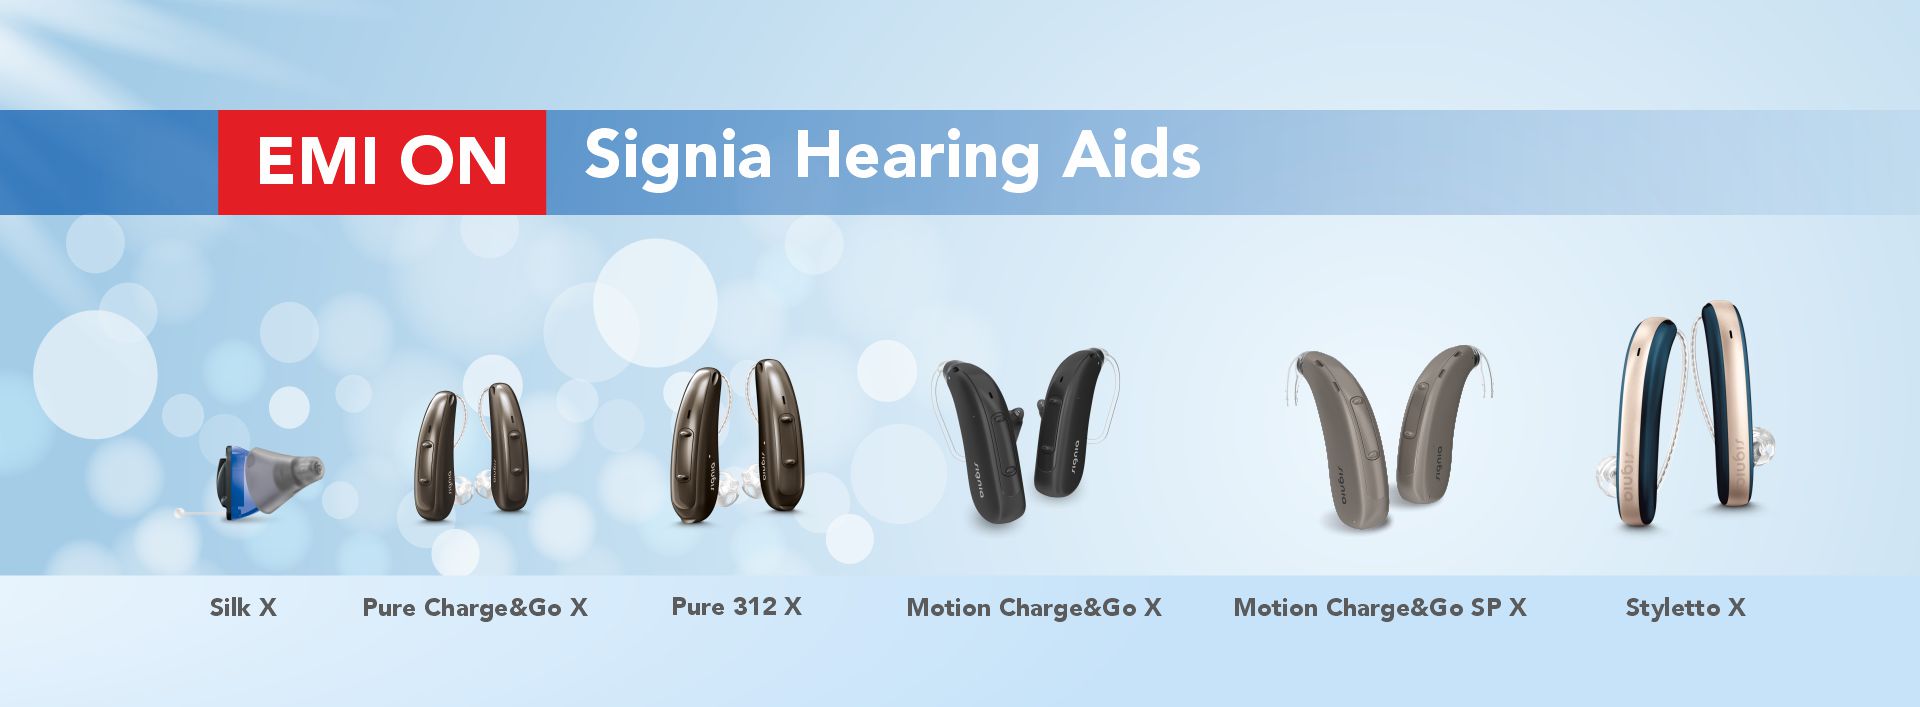 emi-on-signia-hearing-aids Home Banner